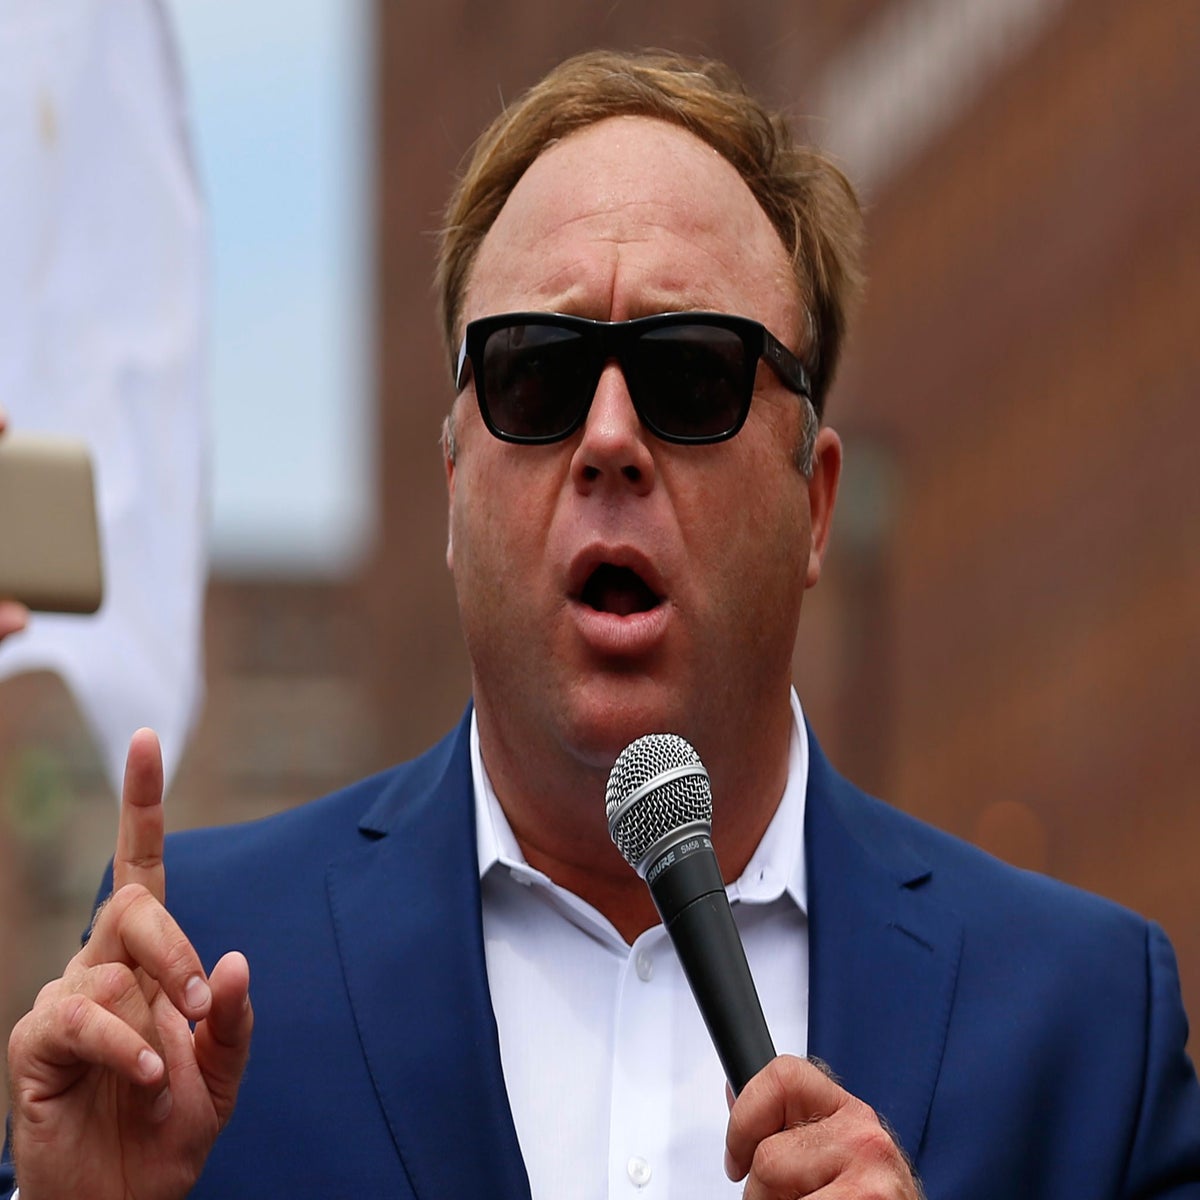 The Rescuers Porn Shemale - Alex Jones spotted with transgender pornography on phone despite  transphobic rants | The Independent | The Independent